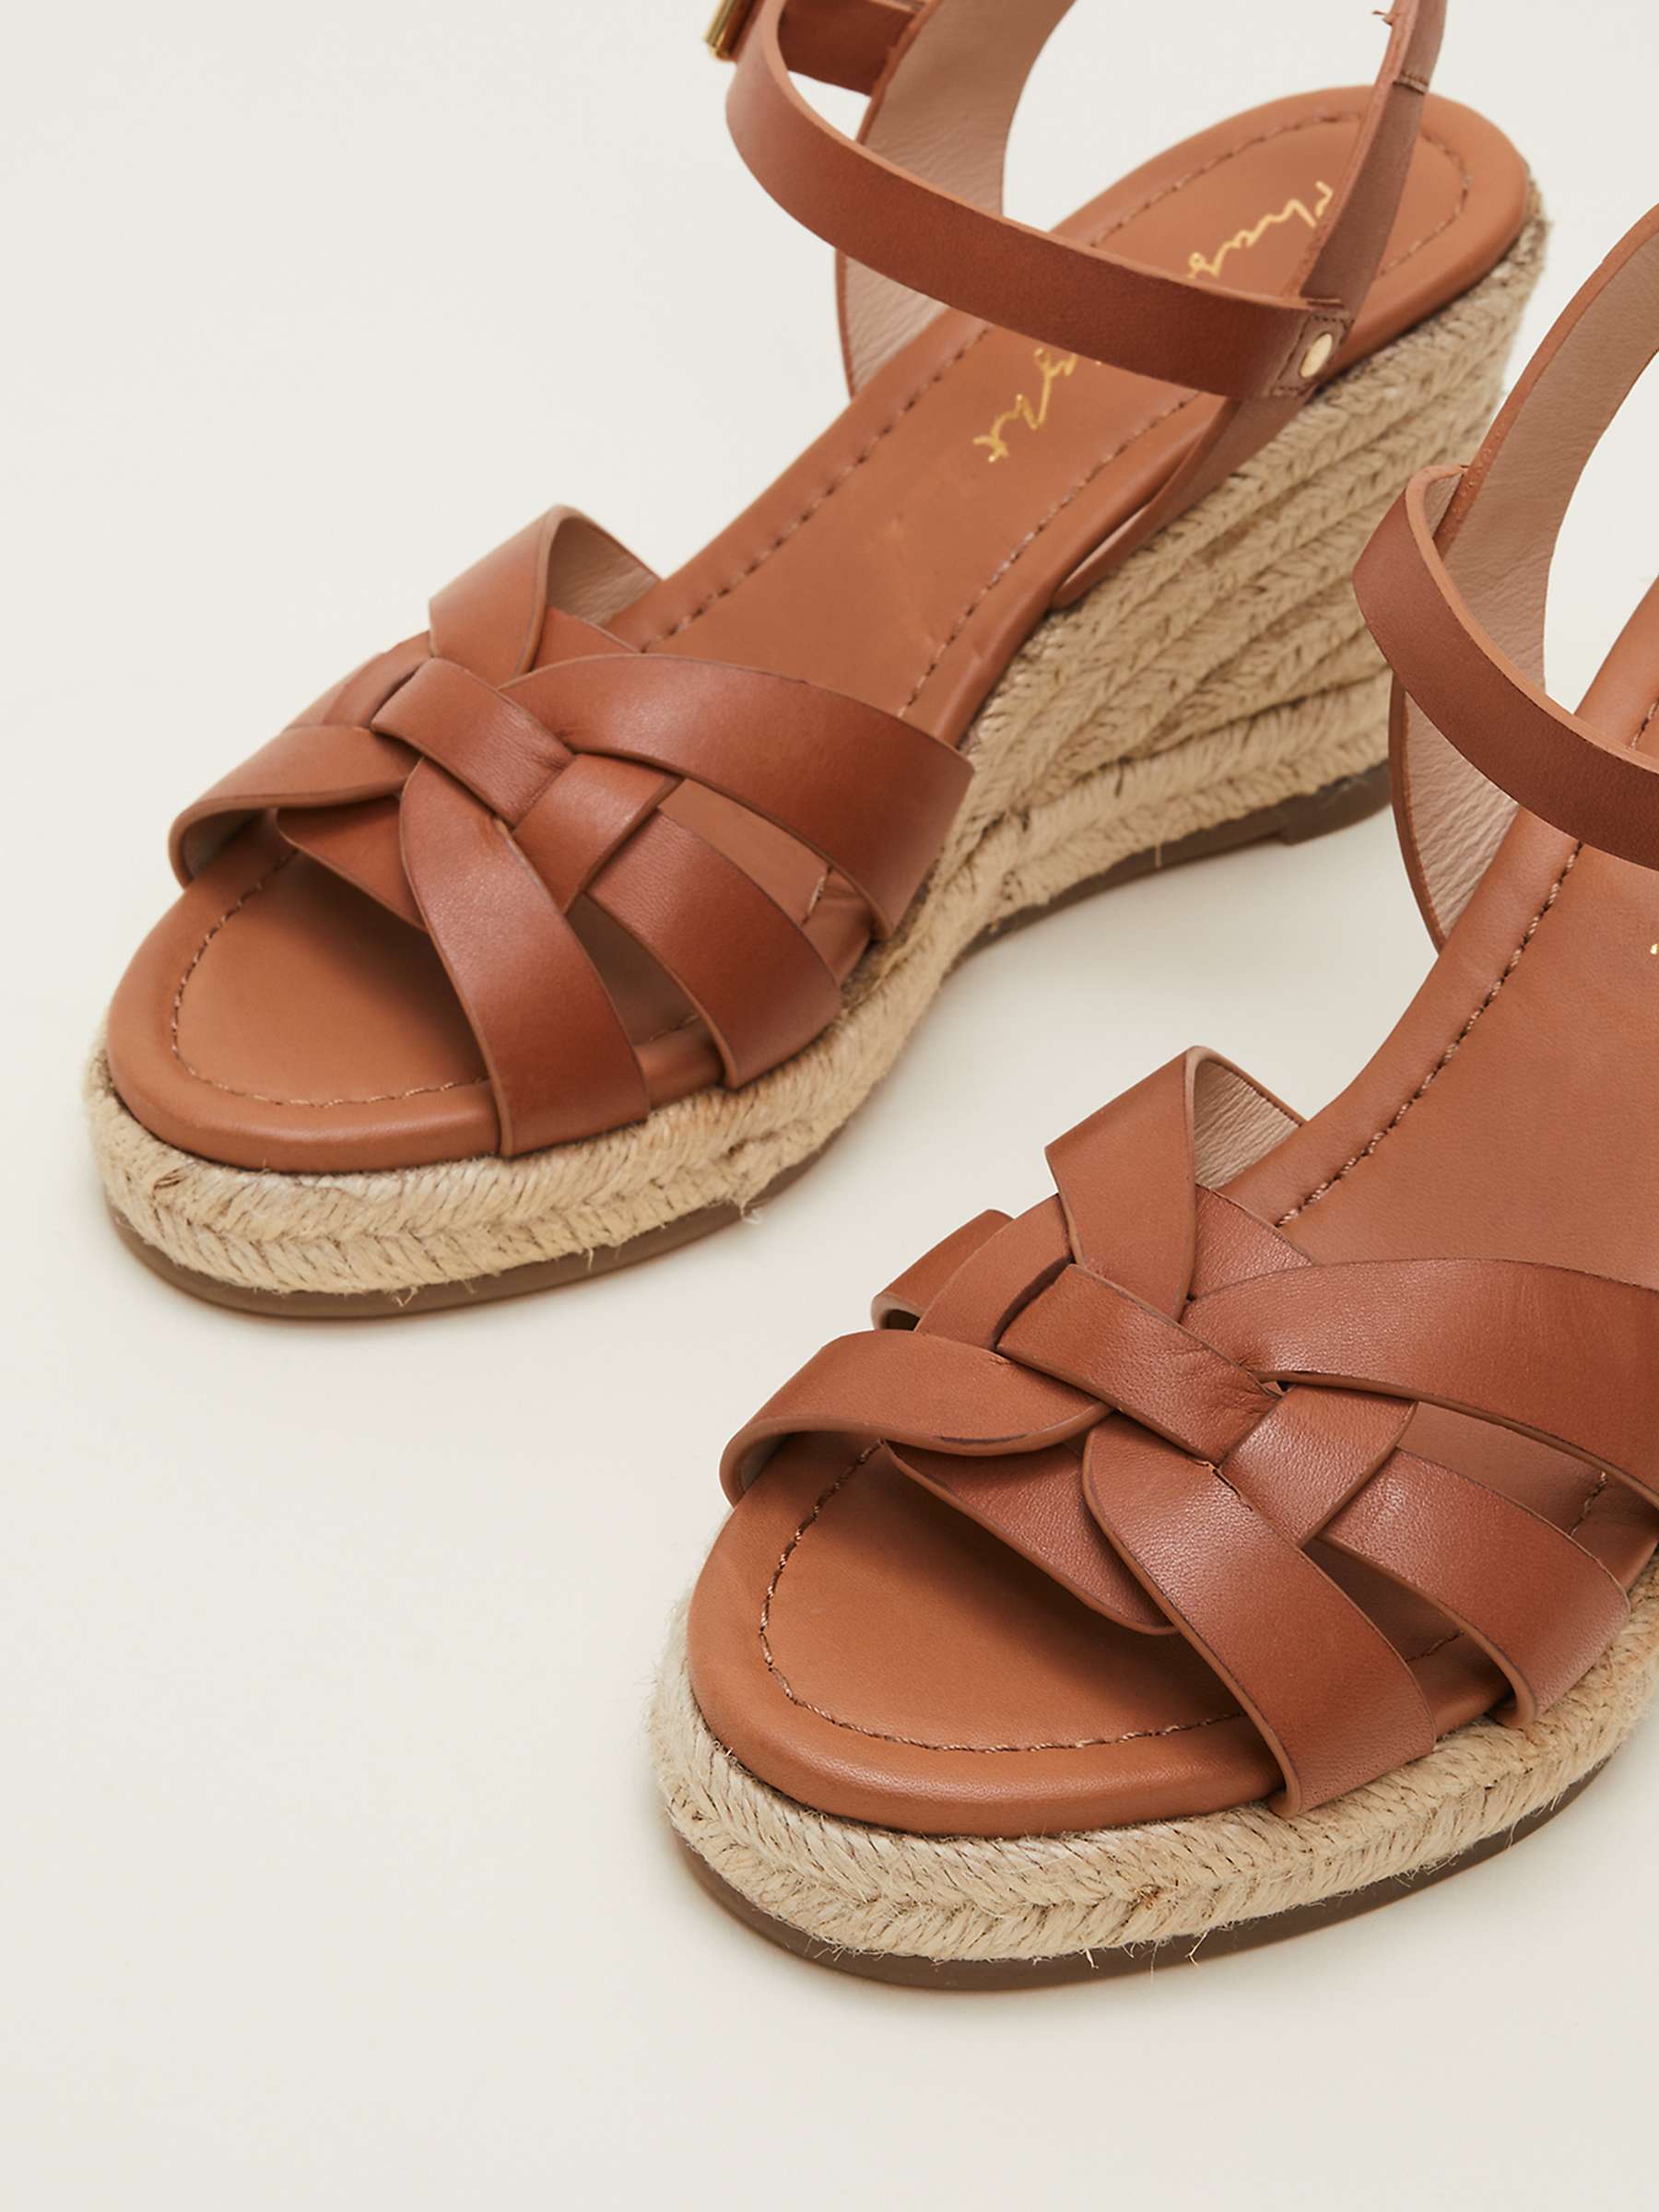 Buy Phase Eight Leather Multi Strap Espadrille Wedge Sandals, Tan Online at johnlewis.com